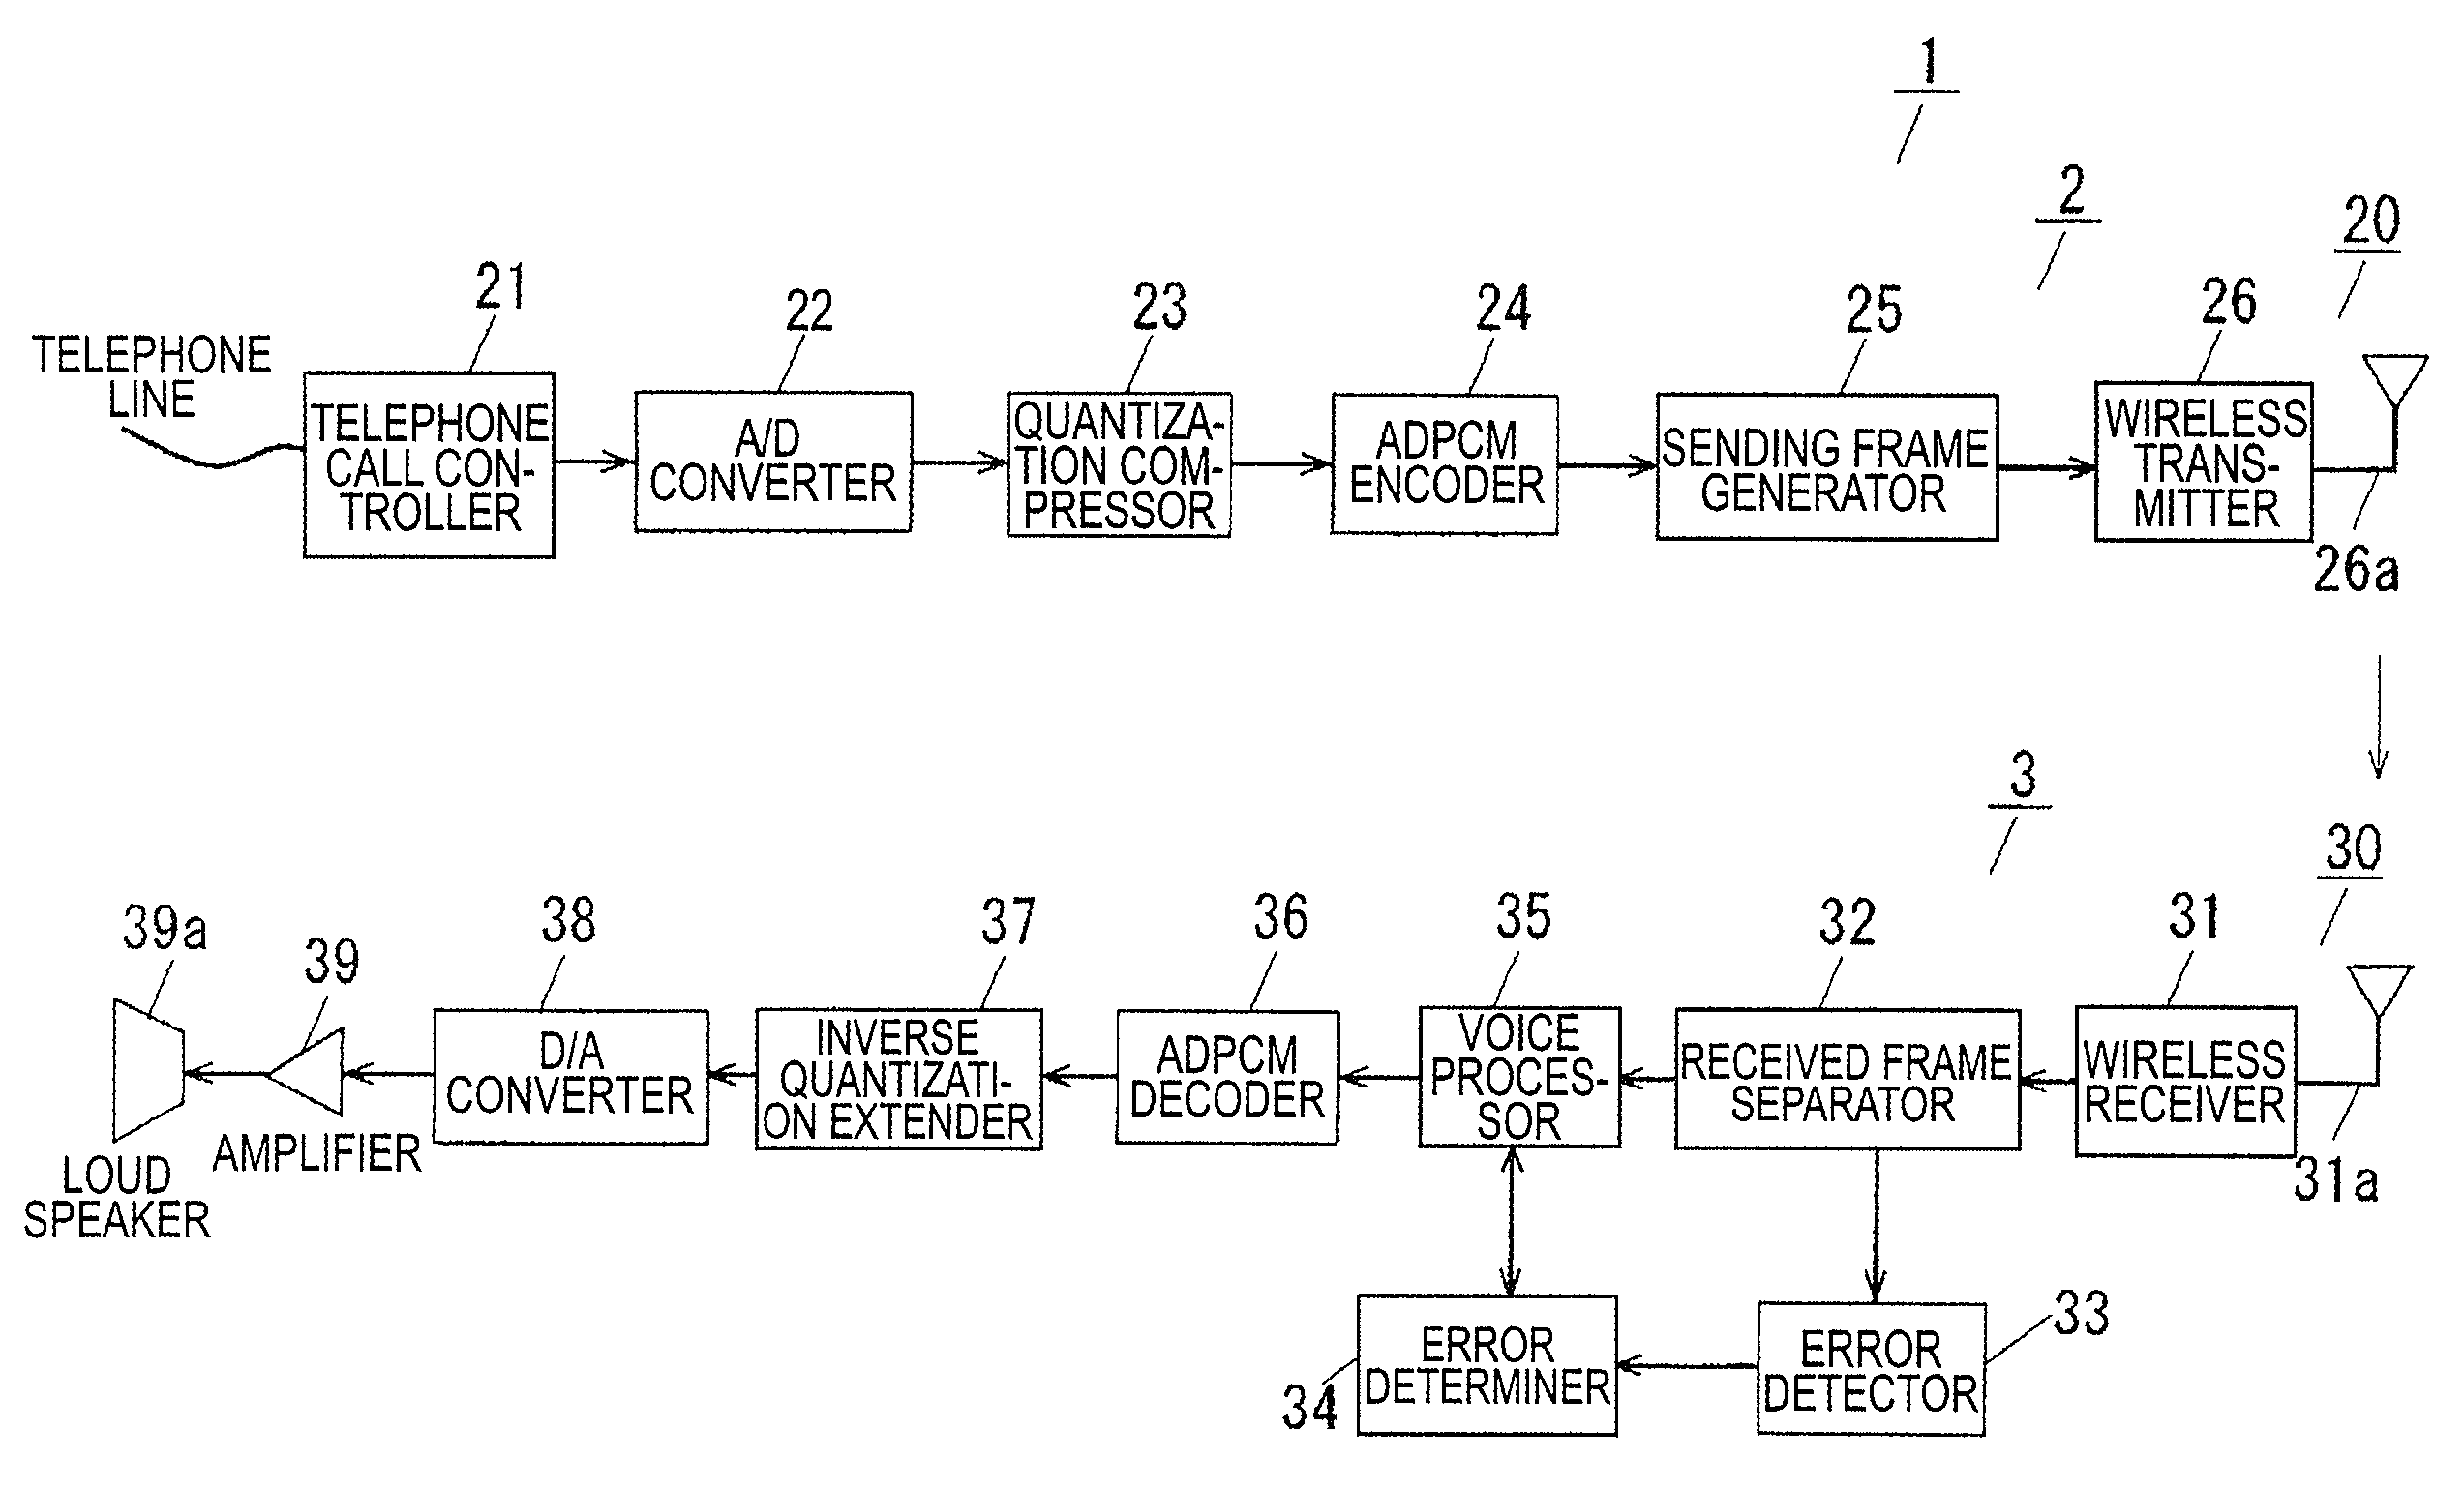 Voice processing apparatus and method for detecting and correcting errors in voice data